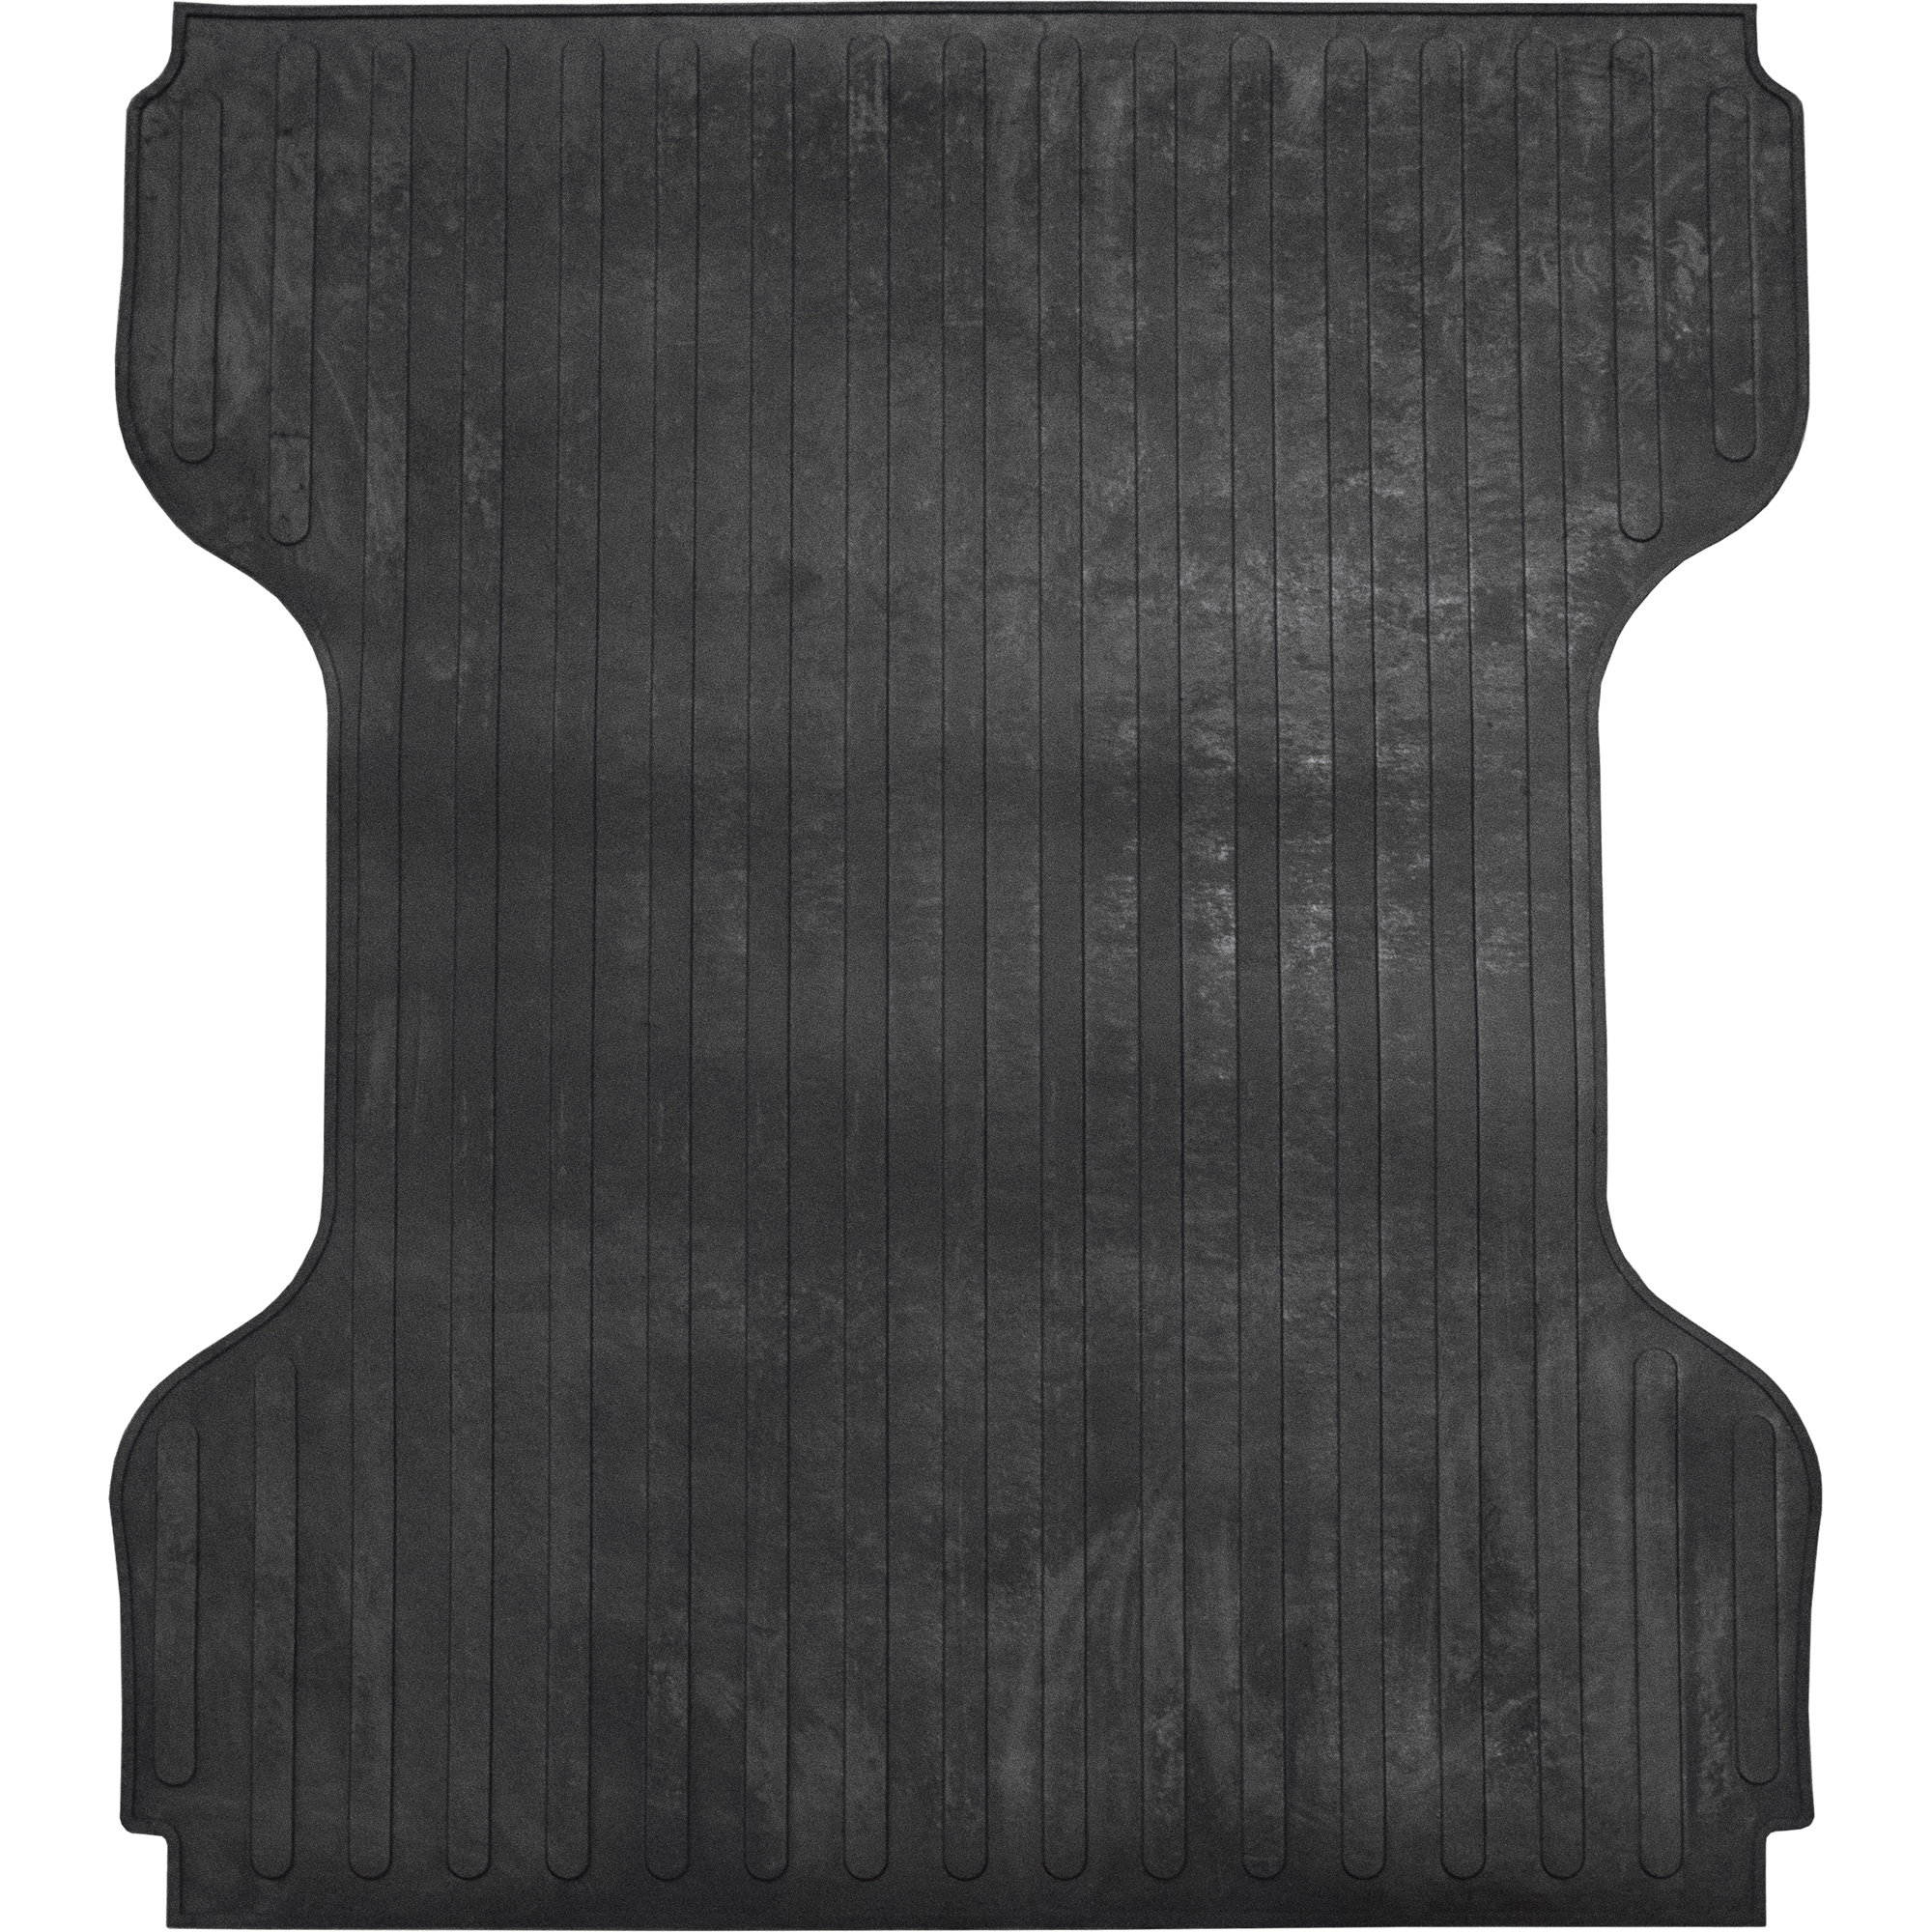 Boomerang Rubber, Toyota Tundra, Yr 2007-2019 Bed Mat, Short Bed, 5.5ft. Long, Primary Color Black, Model TM618BAGGED